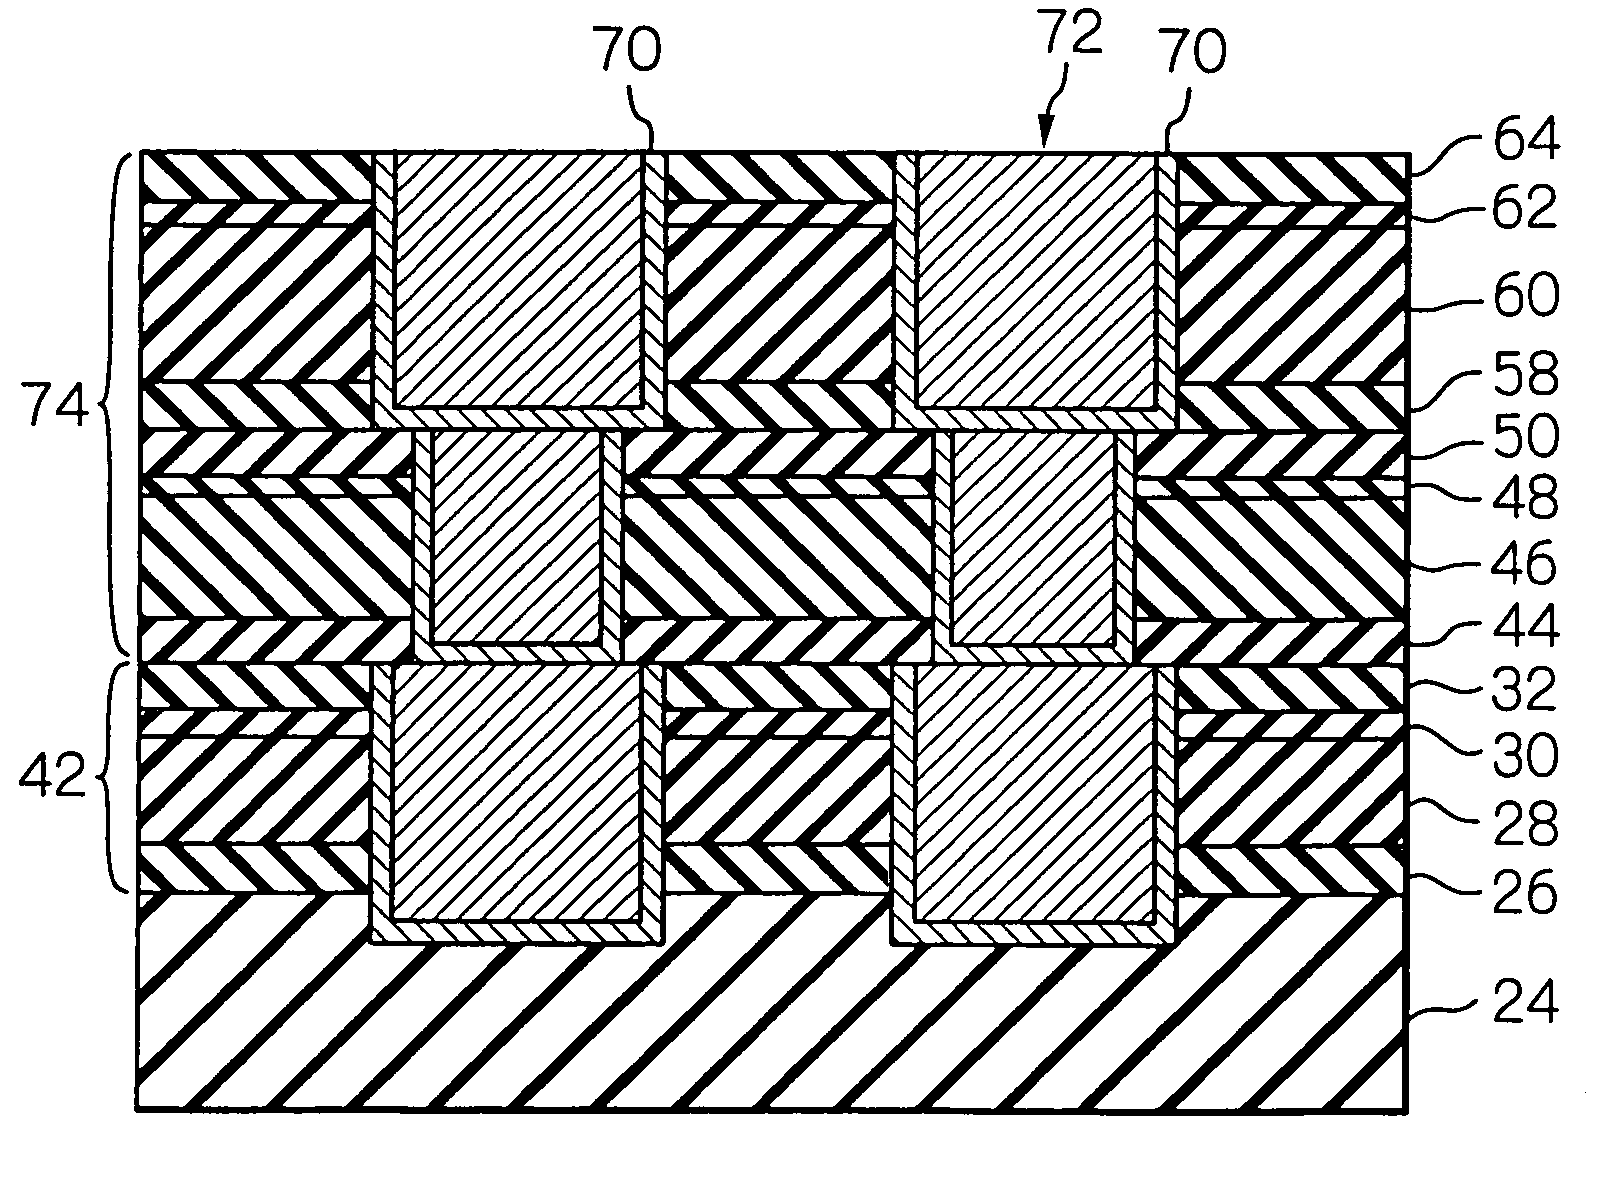 Semiconductor device having two distinct sioch layers